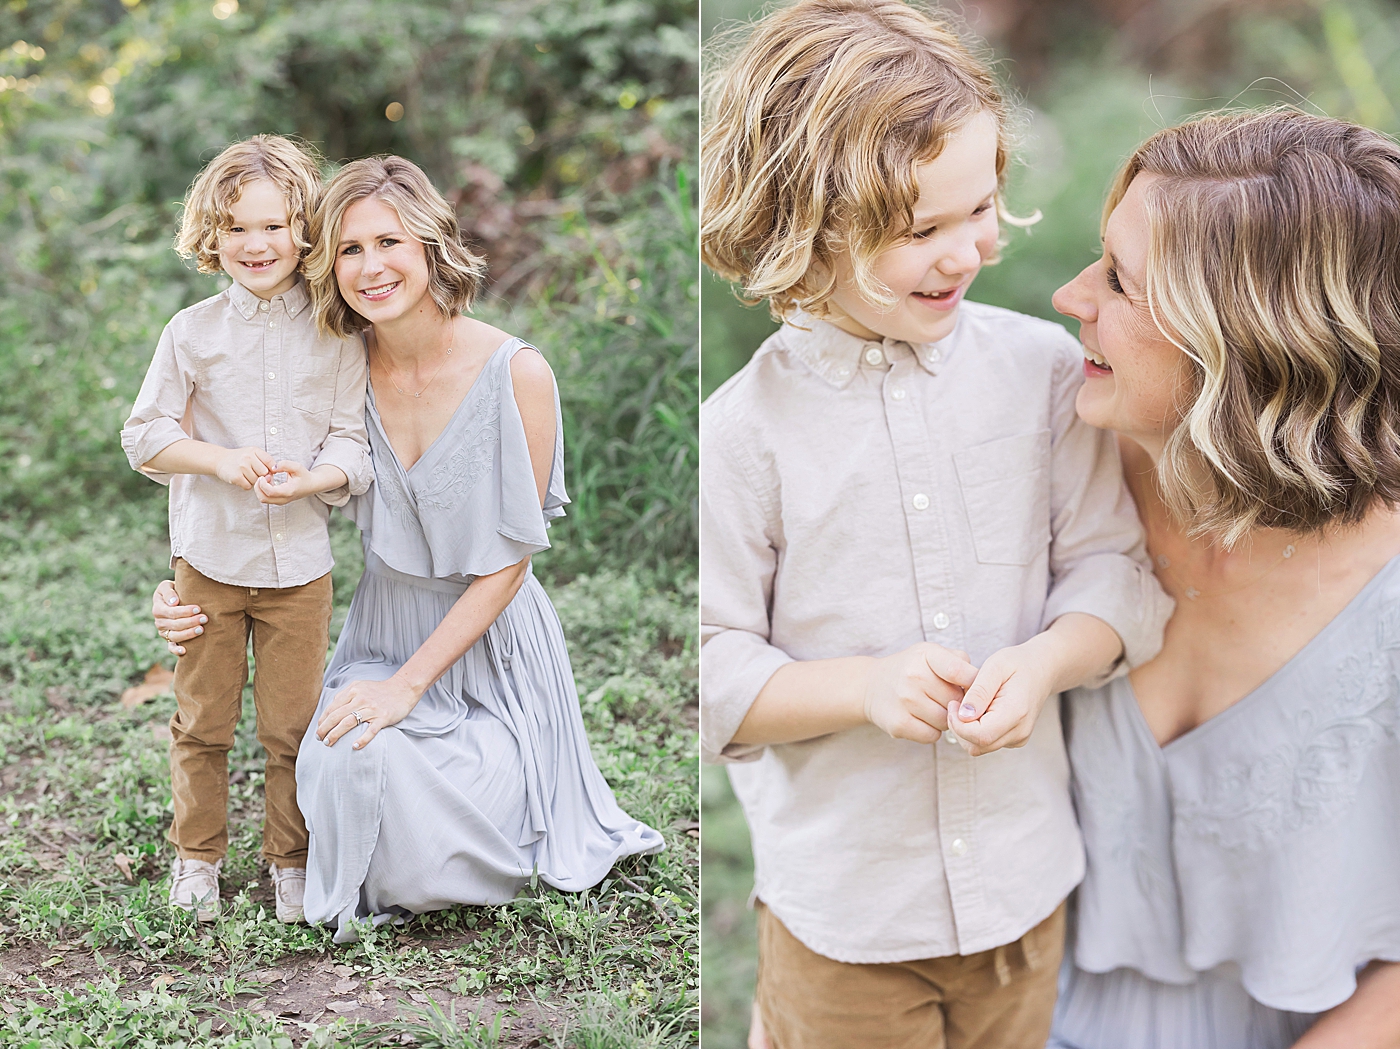 Mom with middle son. Photo by Fresh Light Photography